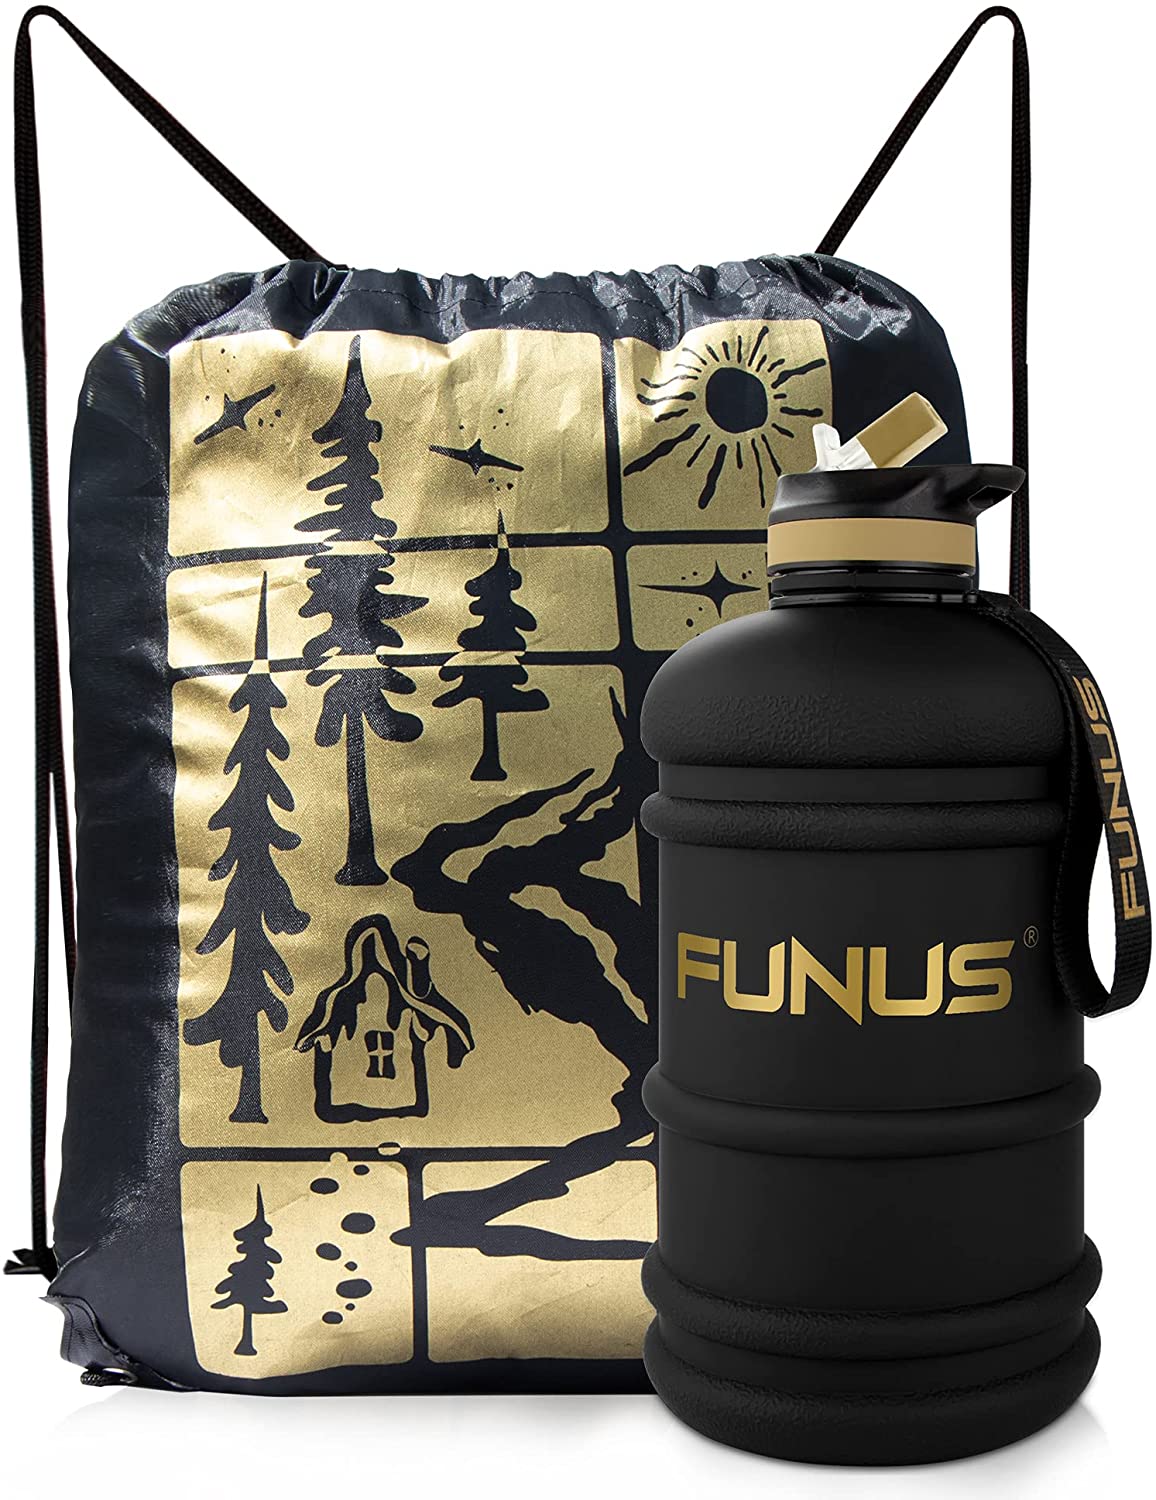 FUNUS Half Gallon Water Bottle Leakproof Big Water Jug with Storage Sleeve and Handle, Reusable Wide Mouth BPA Free Water Bottle for Men Women Sports/Fitness/Gym/Hiking/Outdoor Black Plus